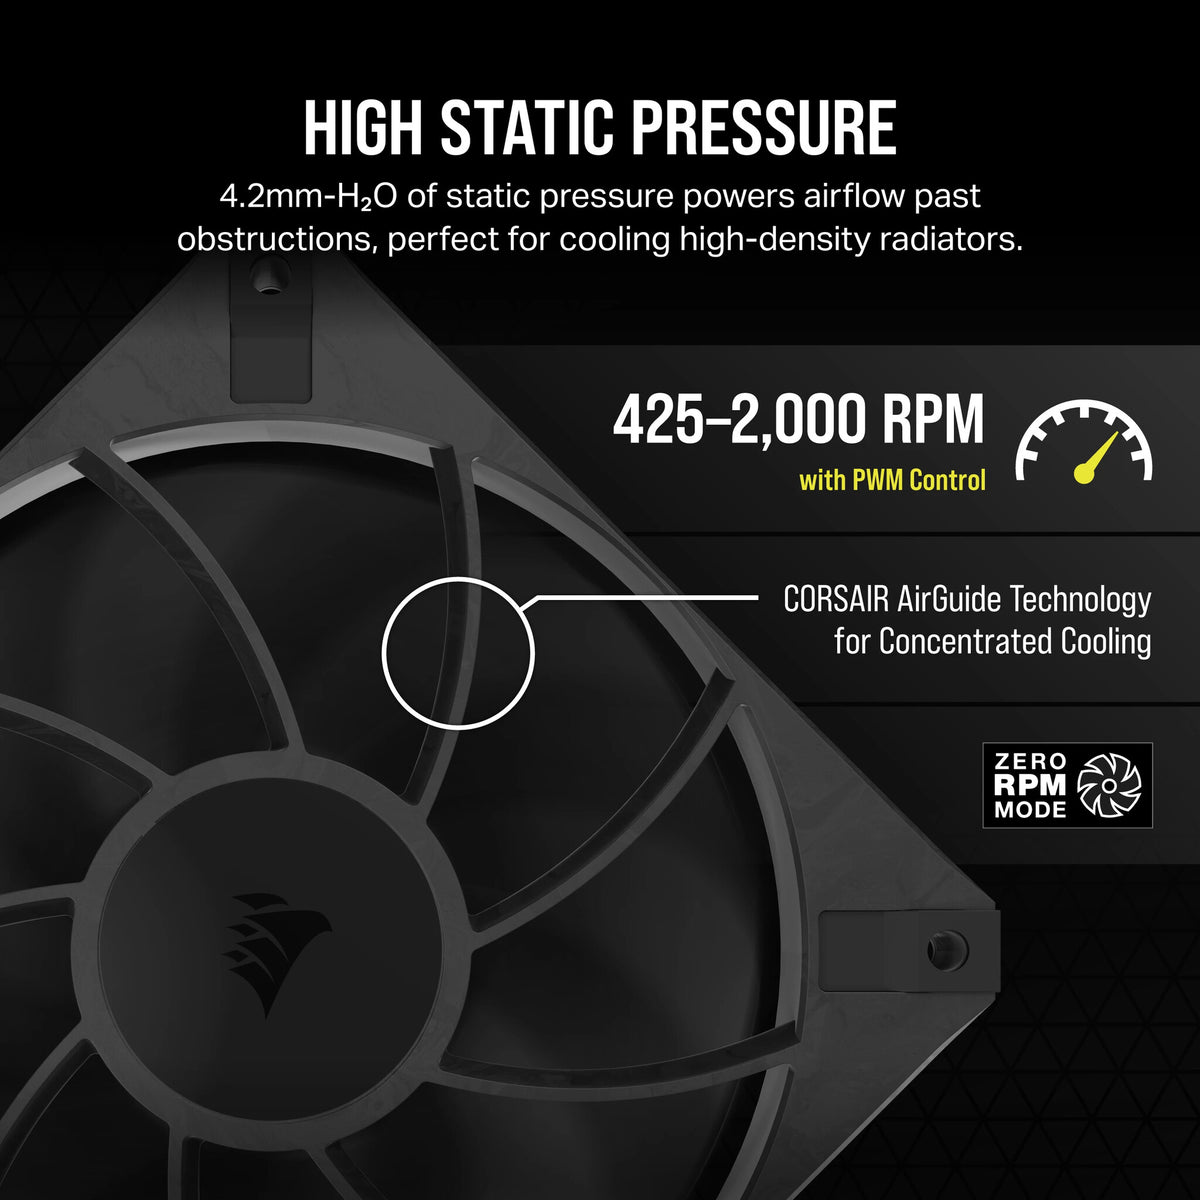 Corsair RS120 MAX - Computer Case Fan in Black - 120mm (Pack of 3)